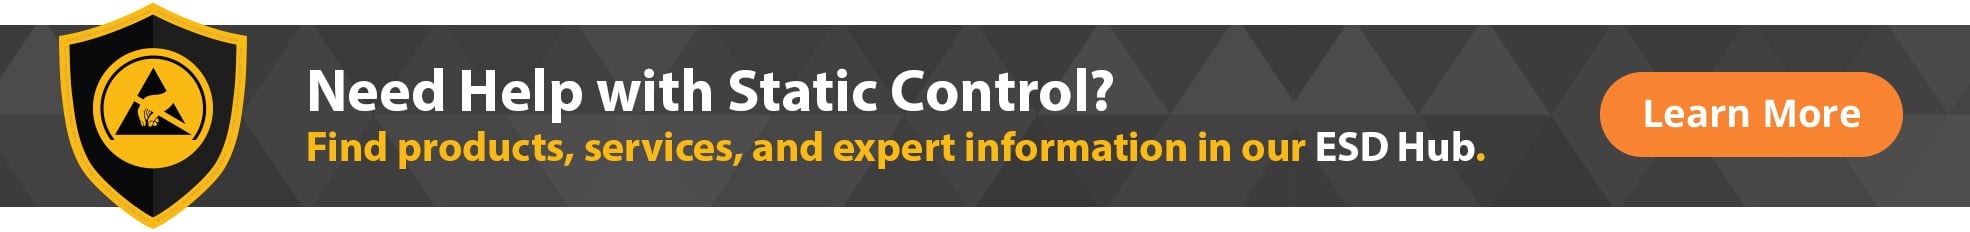 Need Help with Static Control?